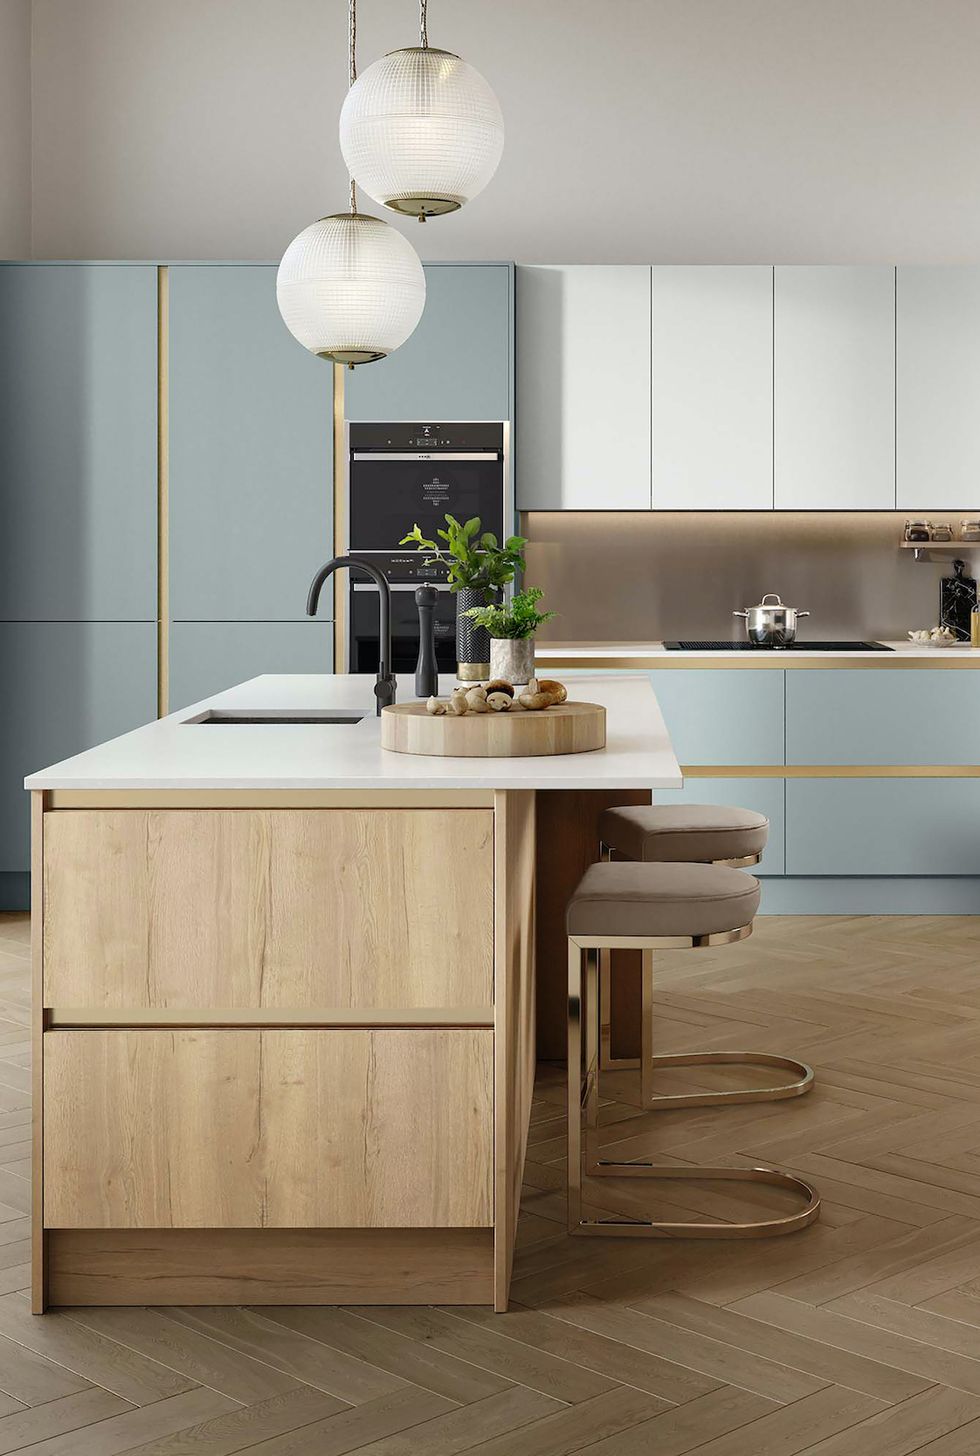 Beautiful Kitchen Designs for Today's Lifestyles